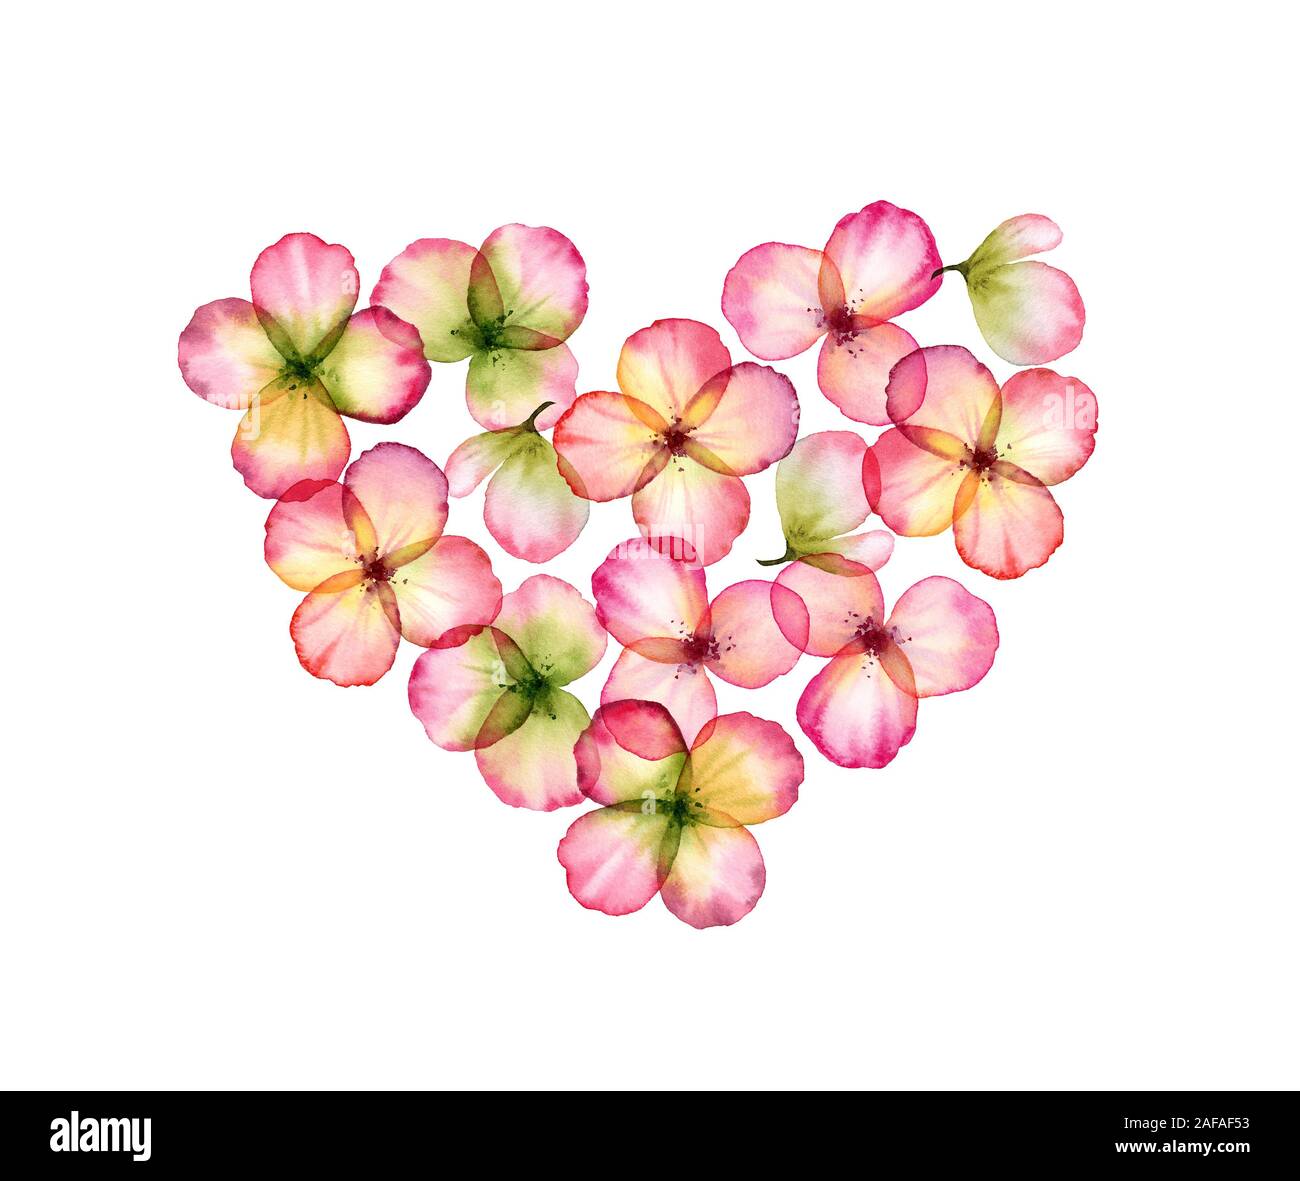 Watercolor heart of flowers. Transparent overlapping petals isolated on white. Botanical floral illustration for Saint Valentine's day greeting cards Stock Photo